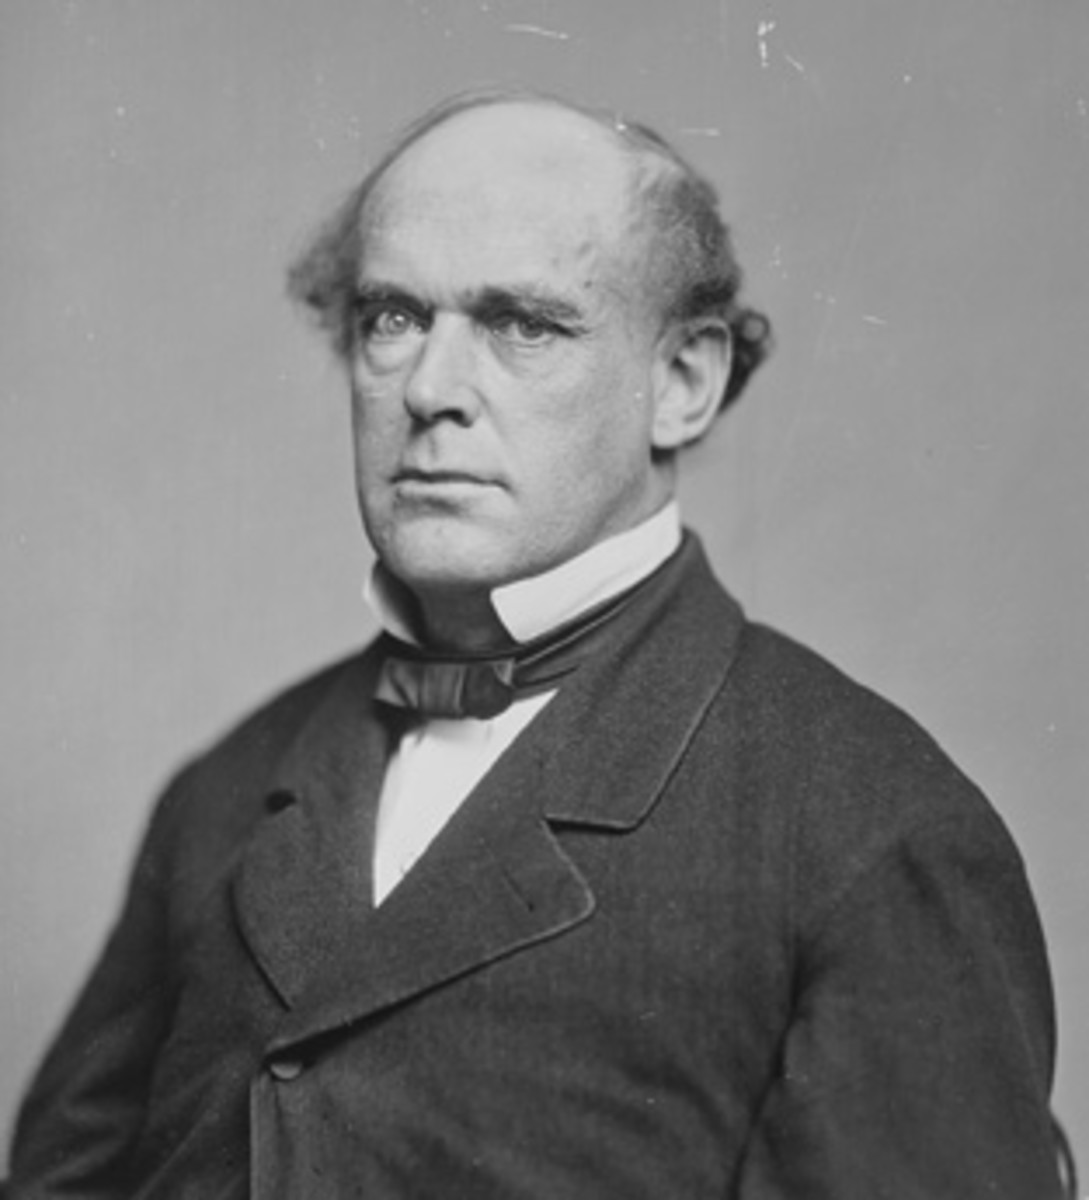  Salmon P. Chase, Secretary of the Treasury during the Civil War. (National Archives photo)